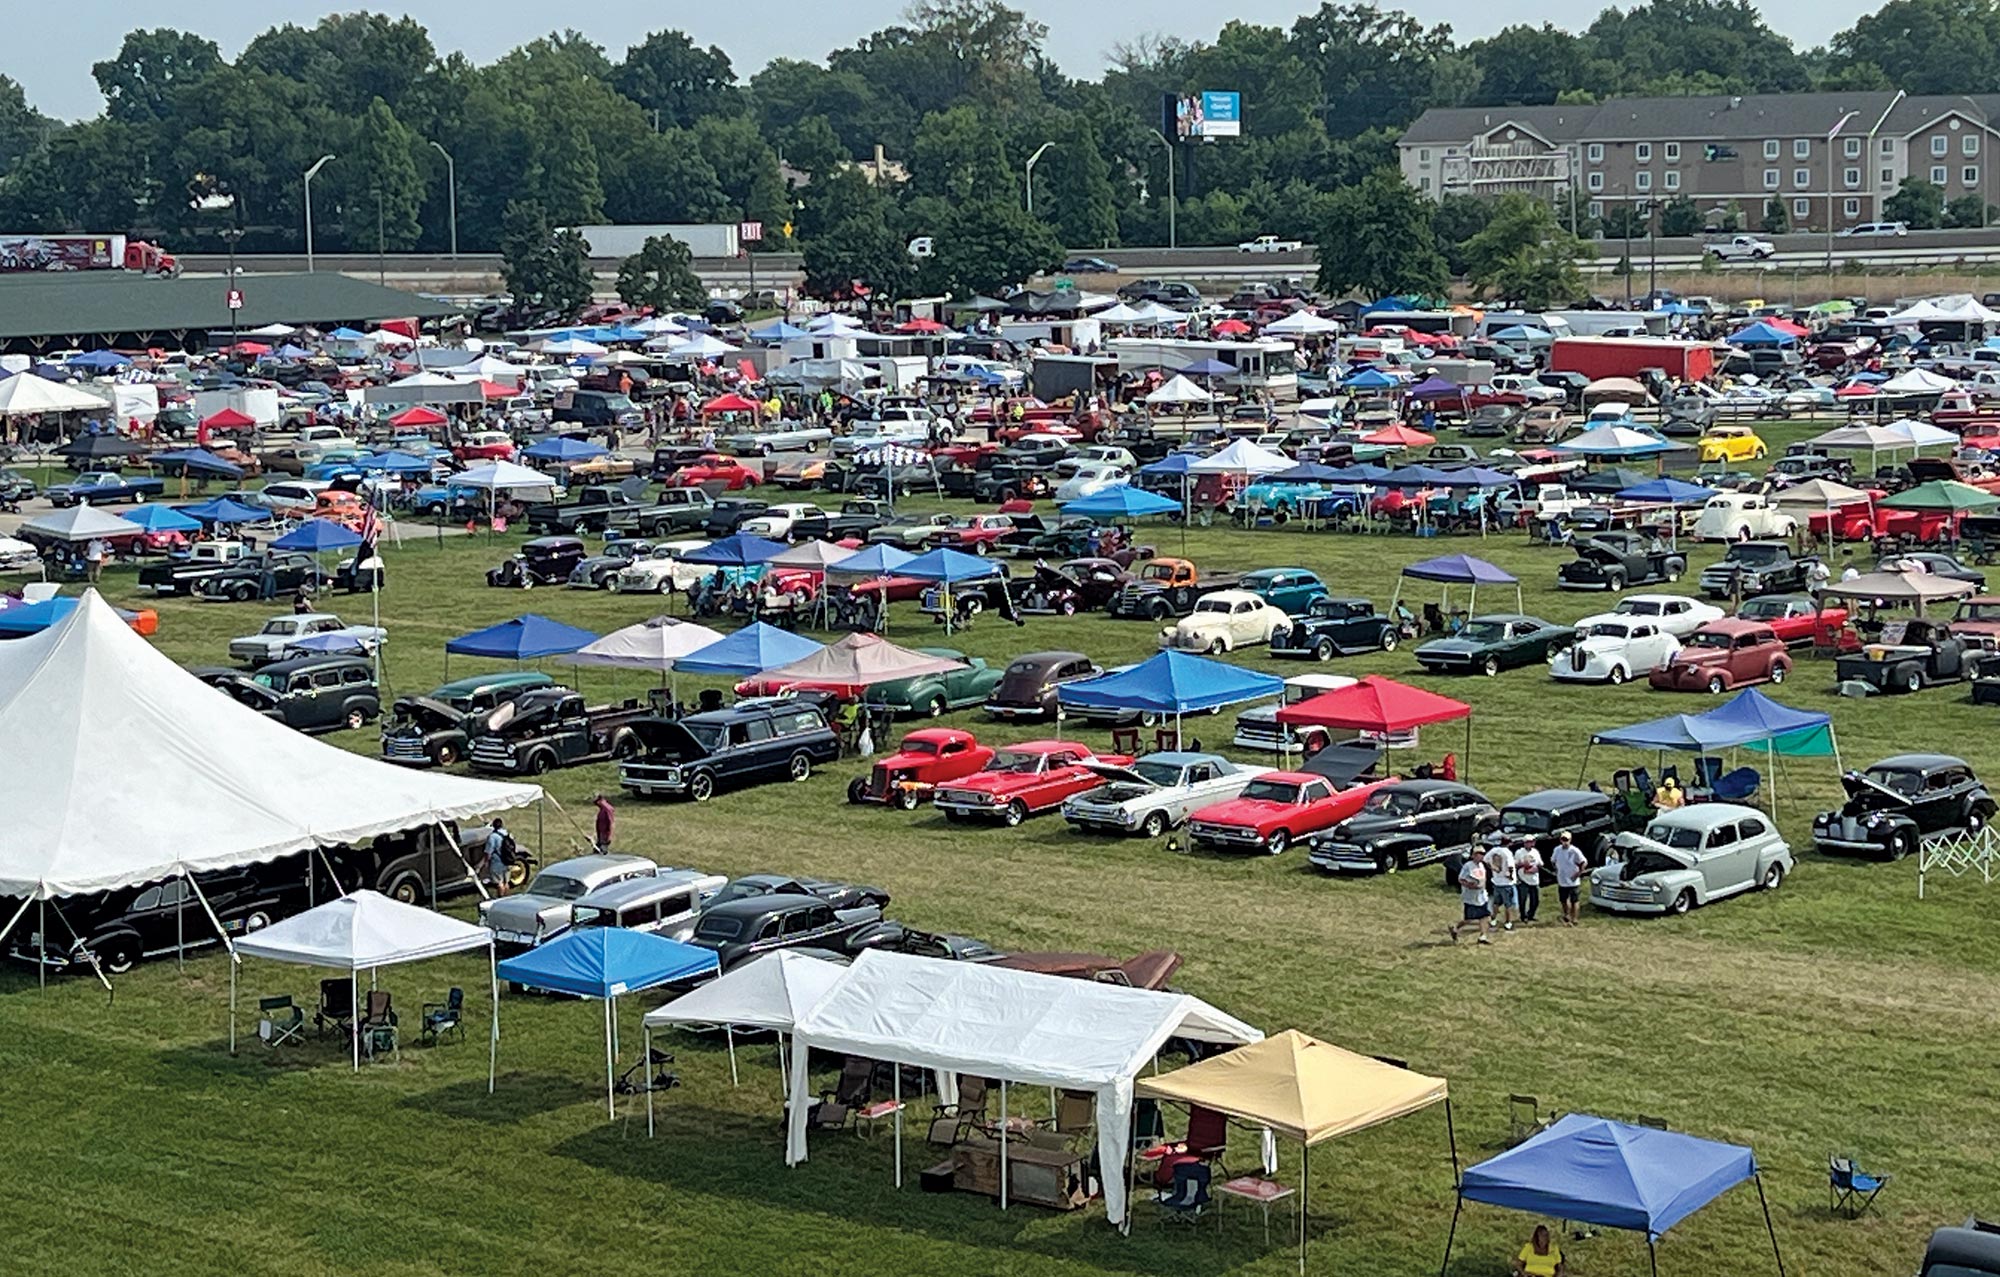 Large grass field area in Louisville, Kentucky with numerous cars, tents, and people gathered together for the 54th annual NSRA Street Rod Nationals